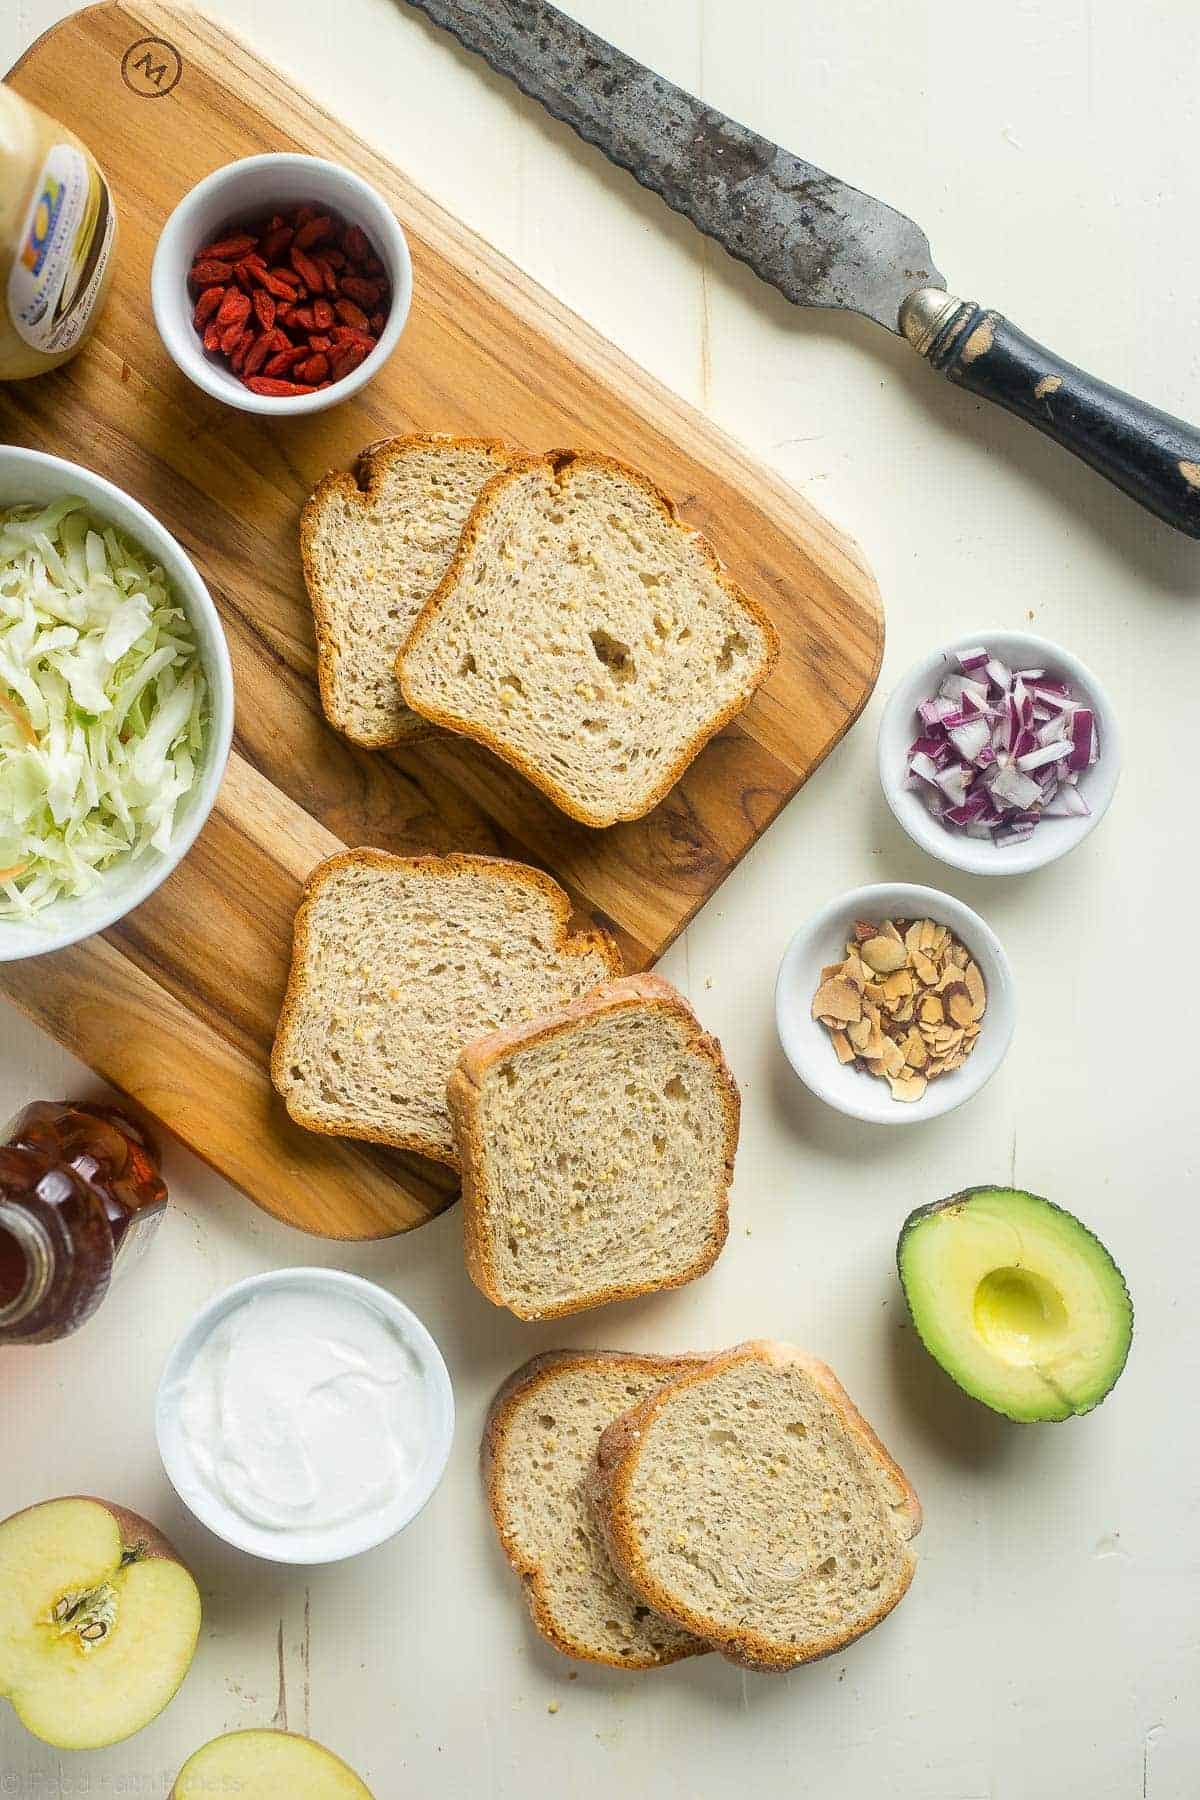 Gluten Free Superfood Greek Yogurt Chicken Salad Sandwich with Honey Mustard - This healthy sandwich is secretly packed with protein and superfoods! It's a quick and easy lunch, portable lunch that's great for kids or adults! | Foodfaithfitness.com | @FoodFaithFit